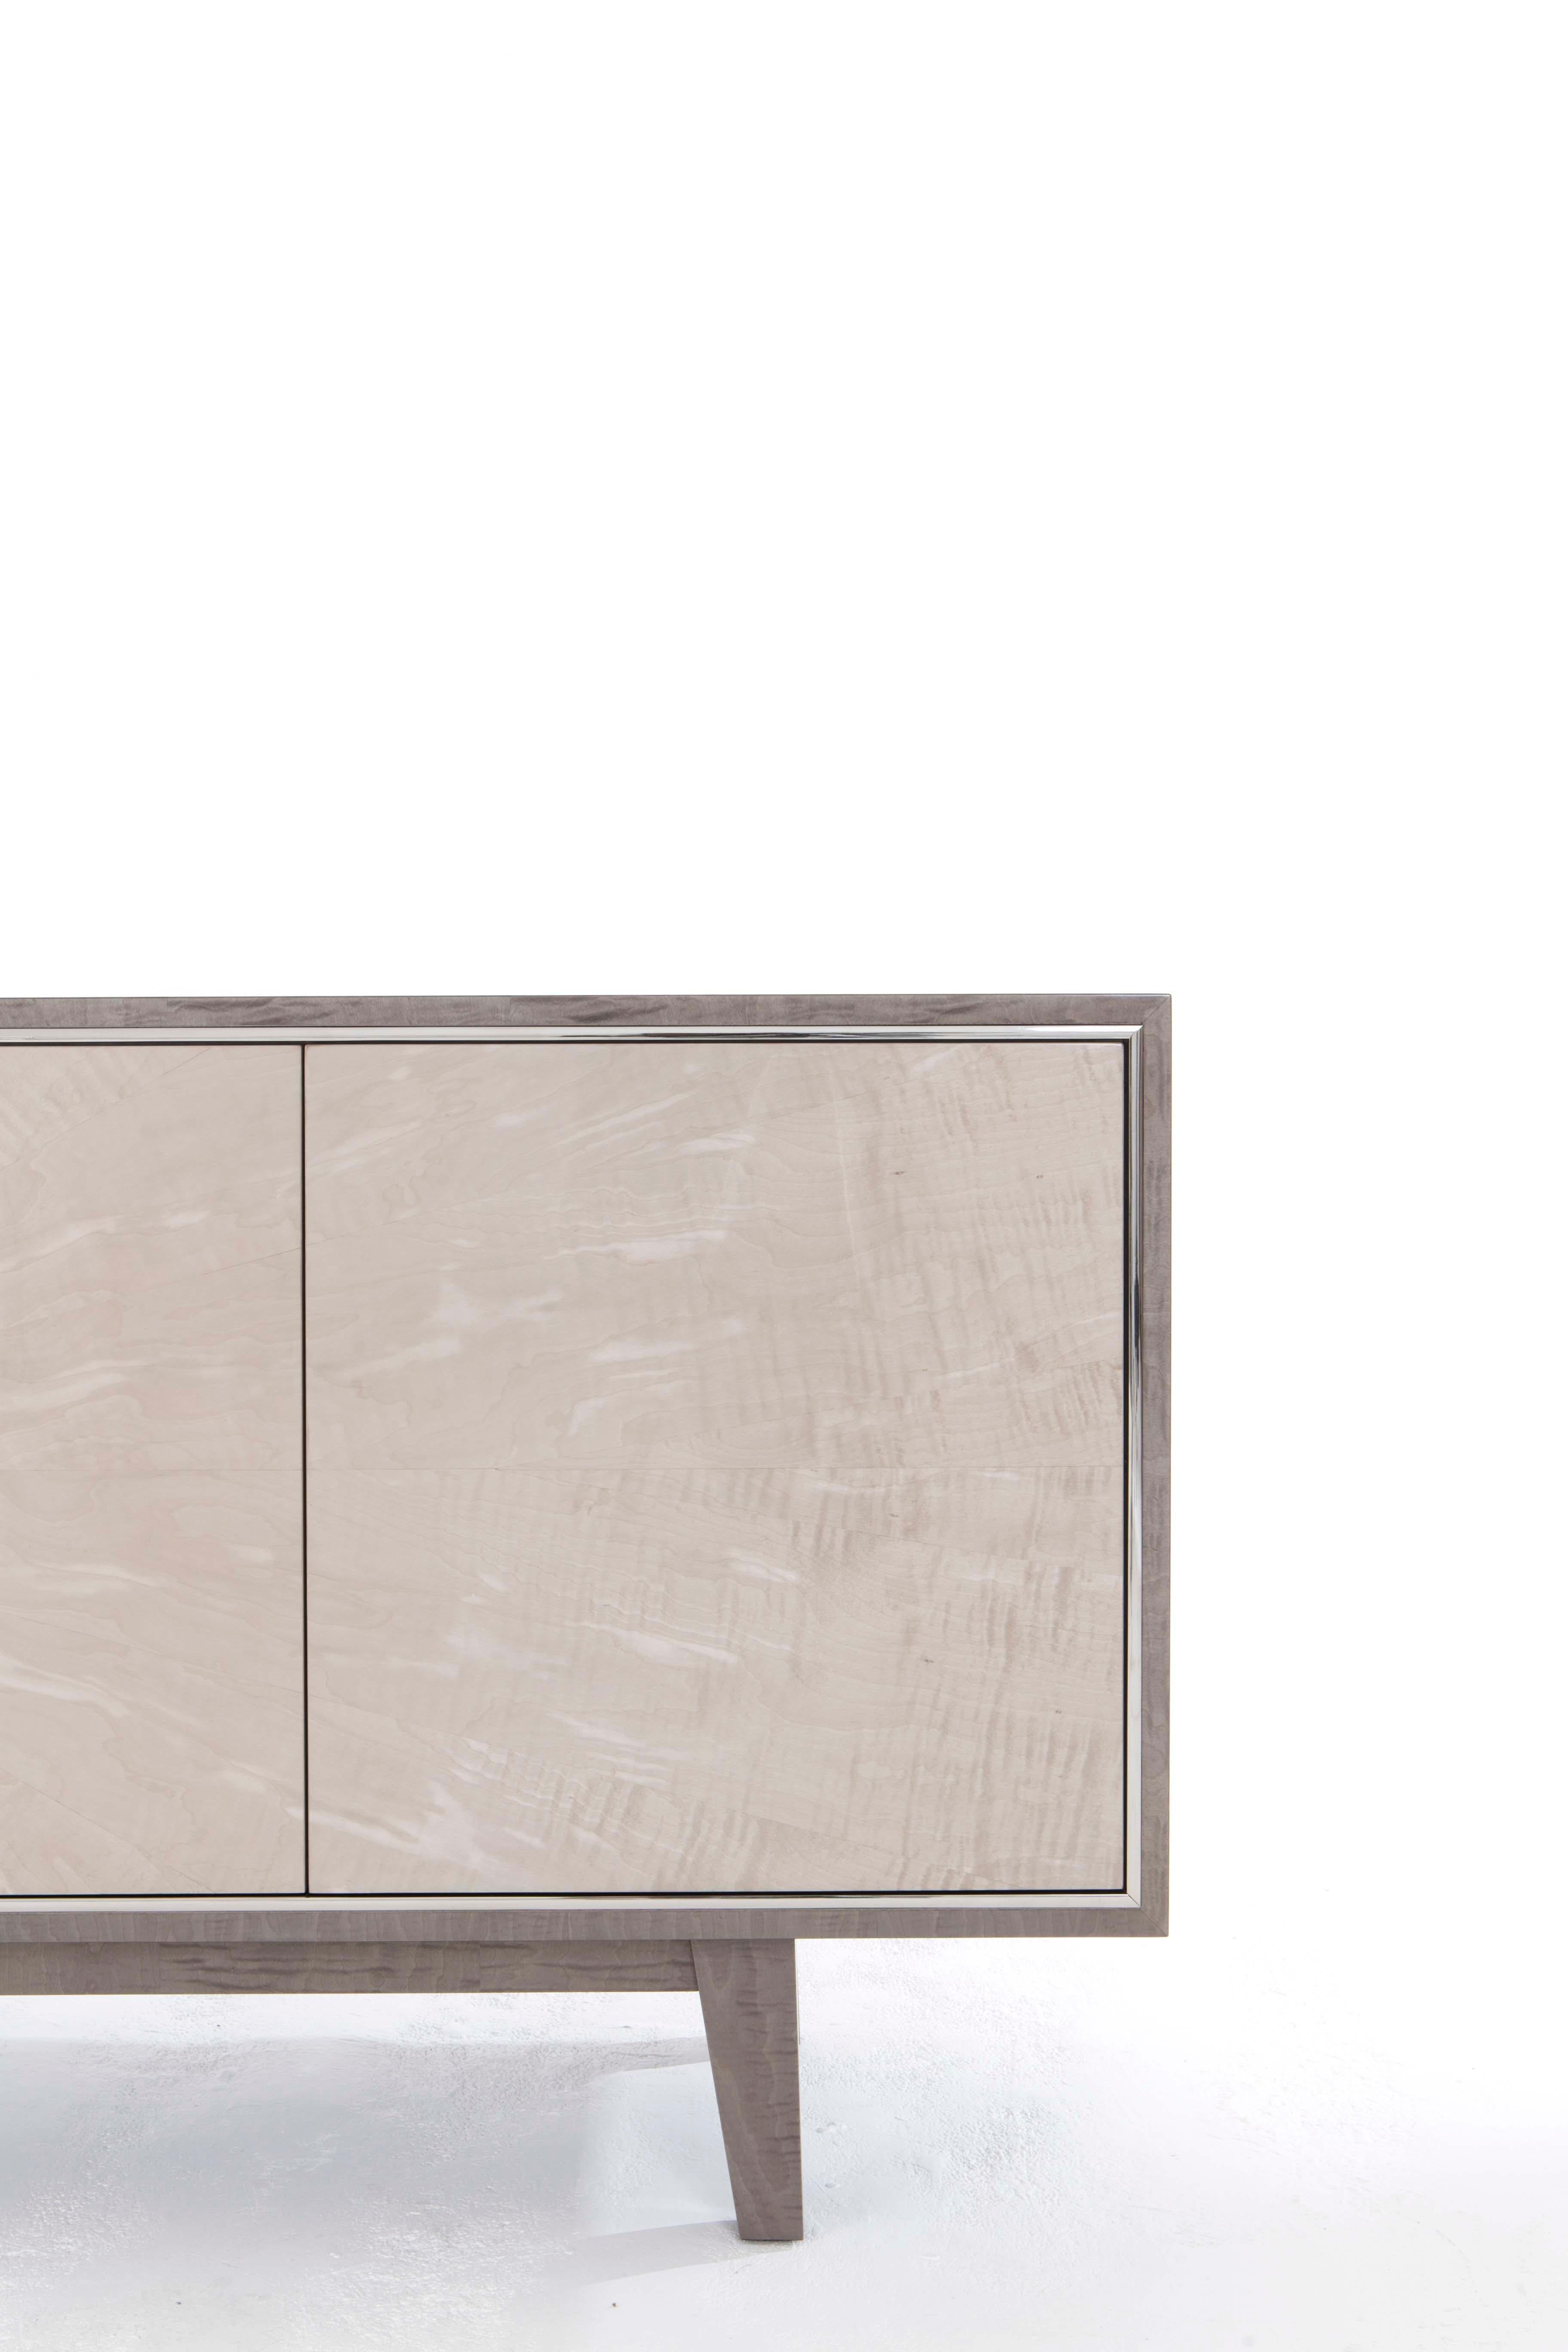 Davidson's Contemporary, Corinthia Side Cabinet in Sycamore Black and Brass  3